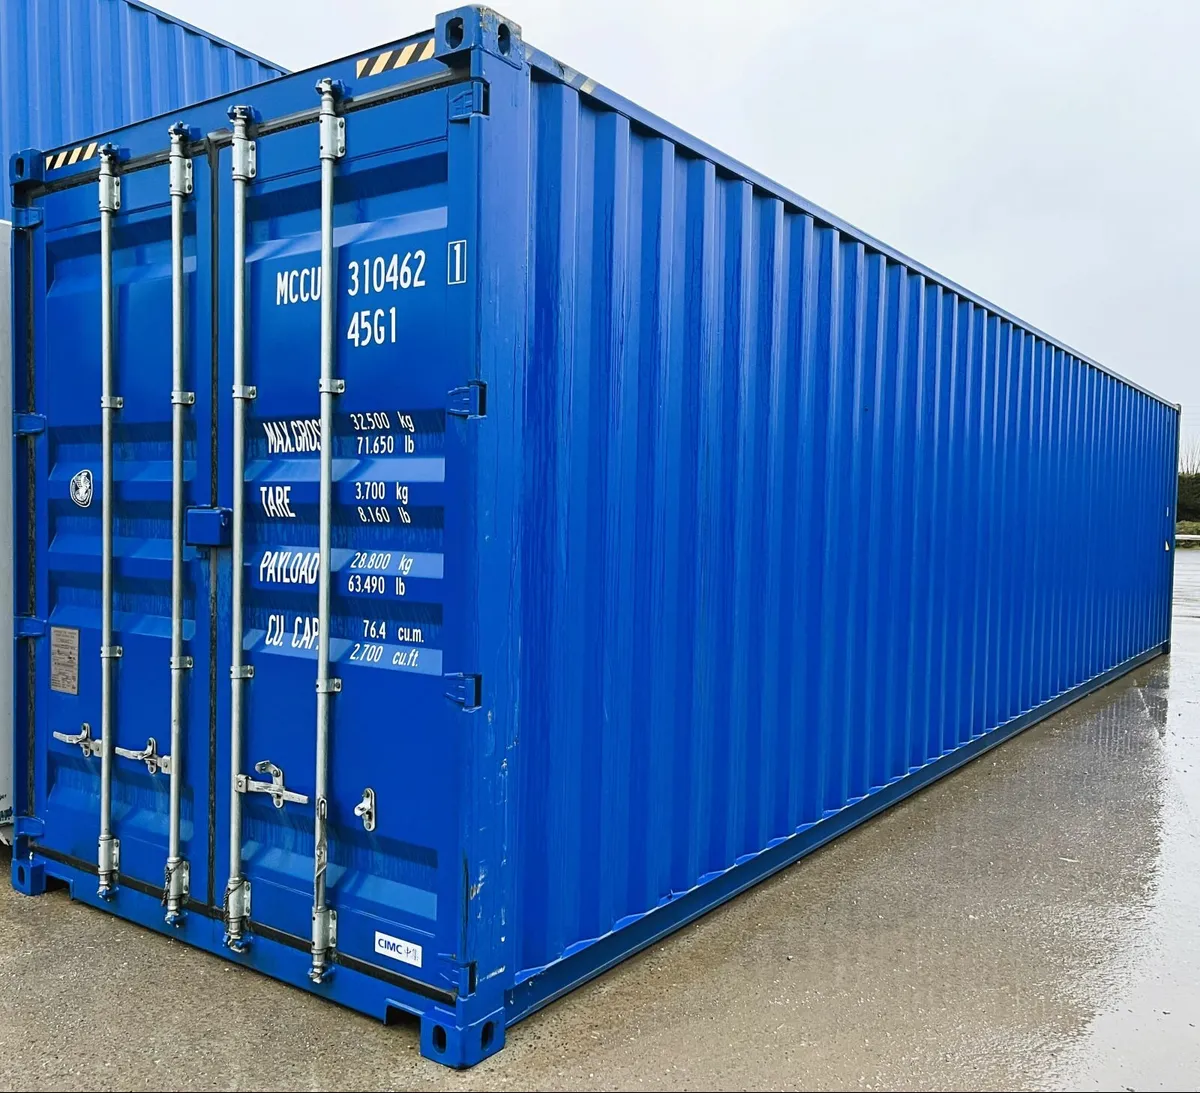 New 40ft Shipping Container - MCCU 310462 / 1